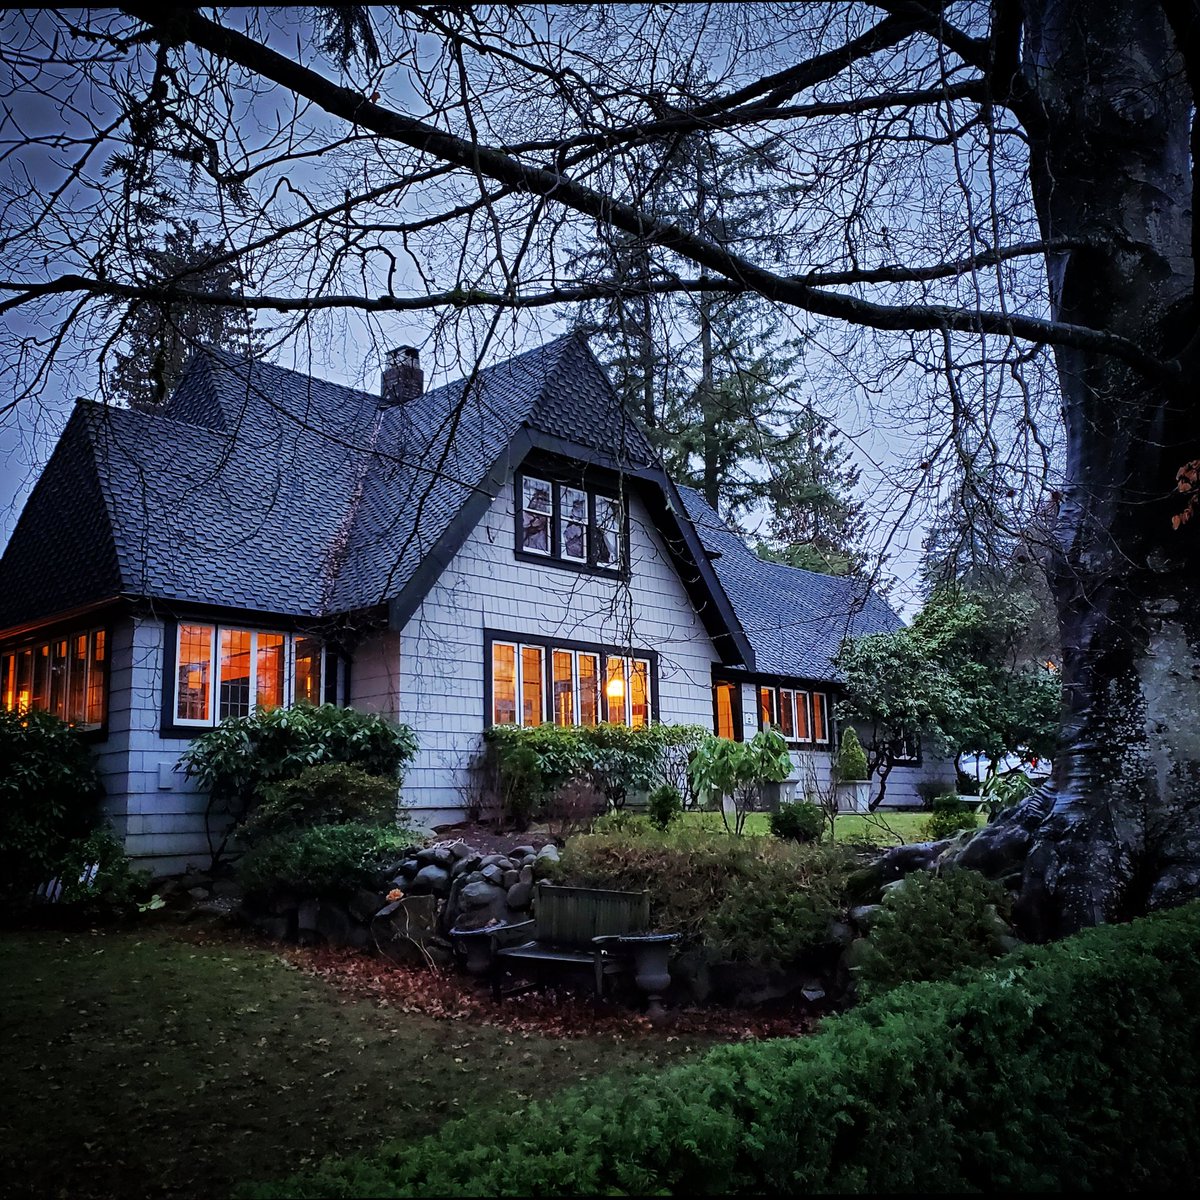 Love this heritage house at the top of Grand Boulevard! The Young Residence, built in 1927.
🕰
#NorthVancouver 
#grandboulevard 
#heritagehouse 
#historichomes
#historicalfictionauthor